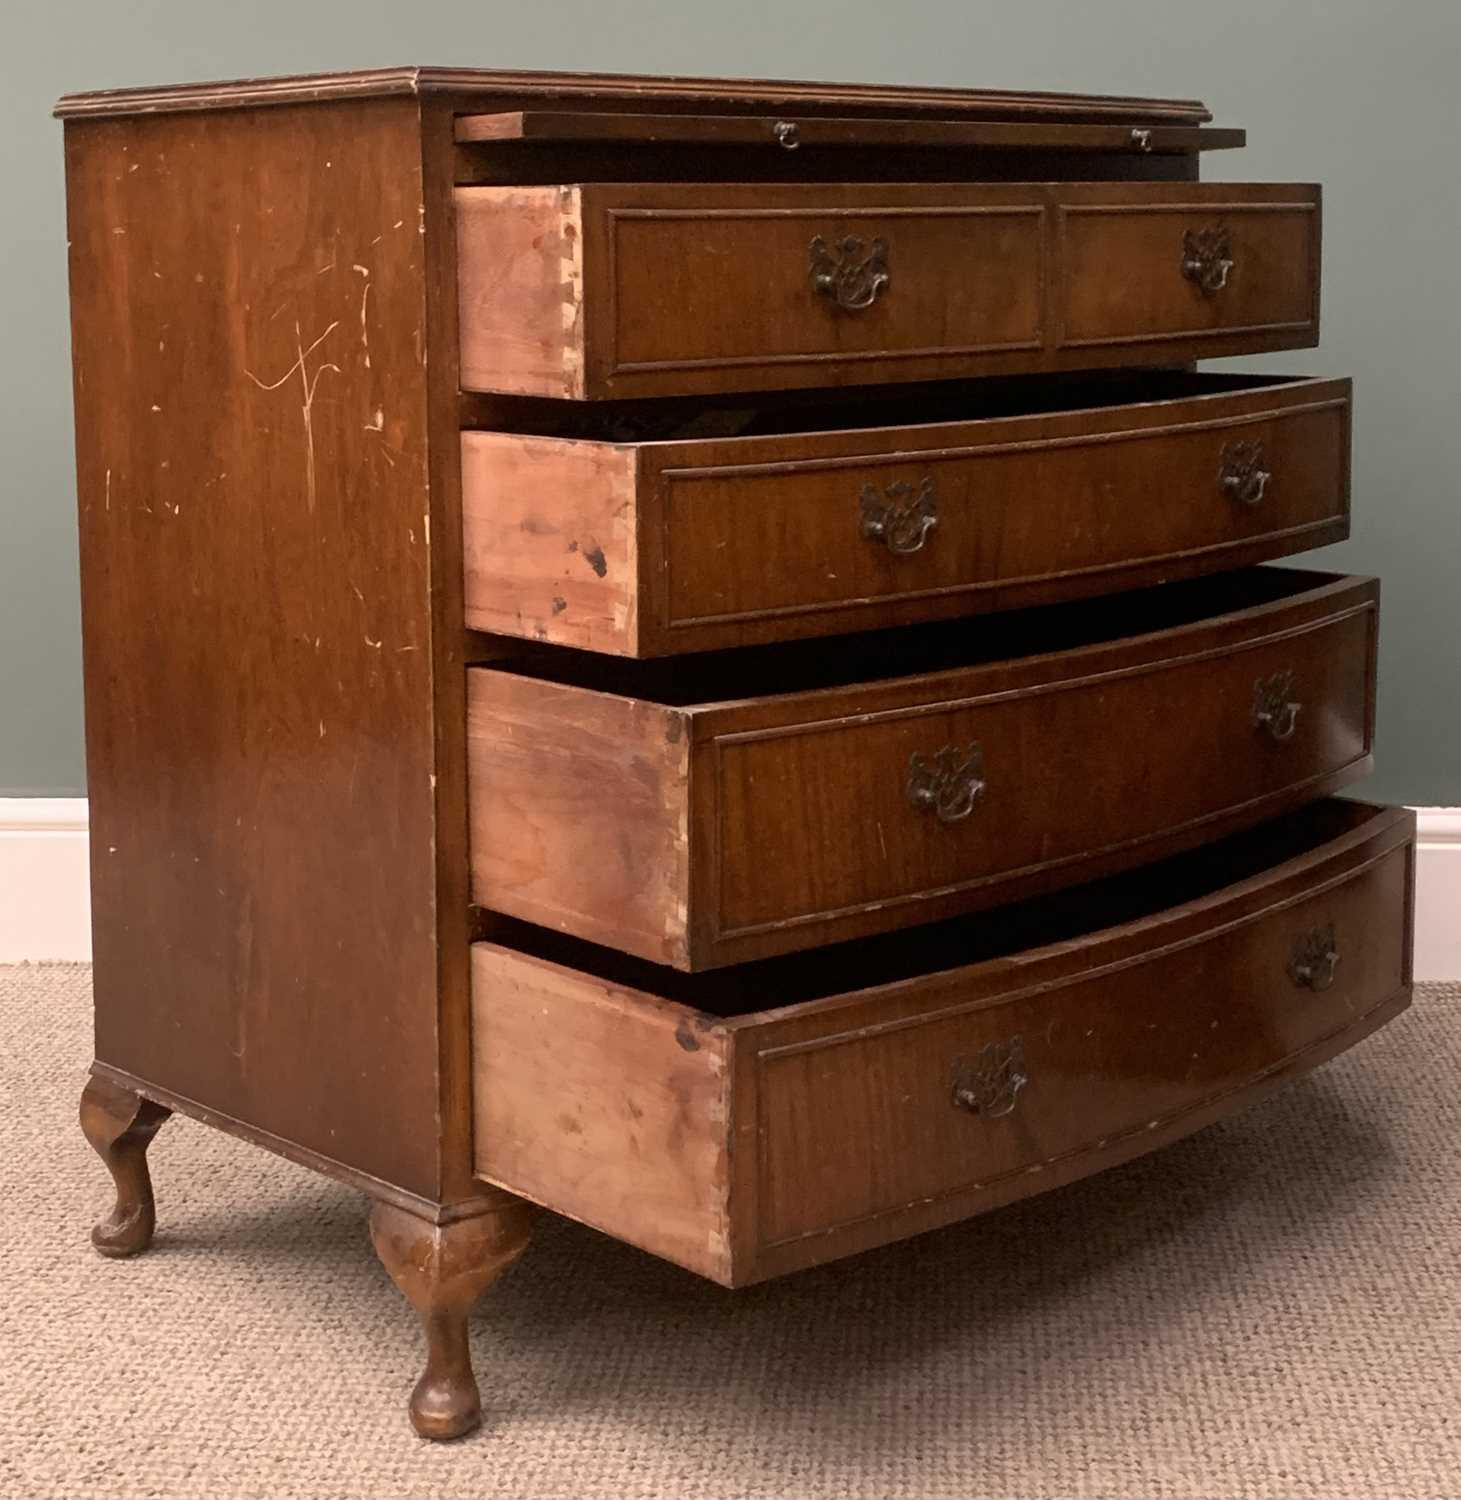 REPRODUCTION MAHOGANY BOW FRONT FOUR DRAWER CHEST, with brush slider, 83 (h) x 77 (w) x 45 (d) cms - Image 2 of 5